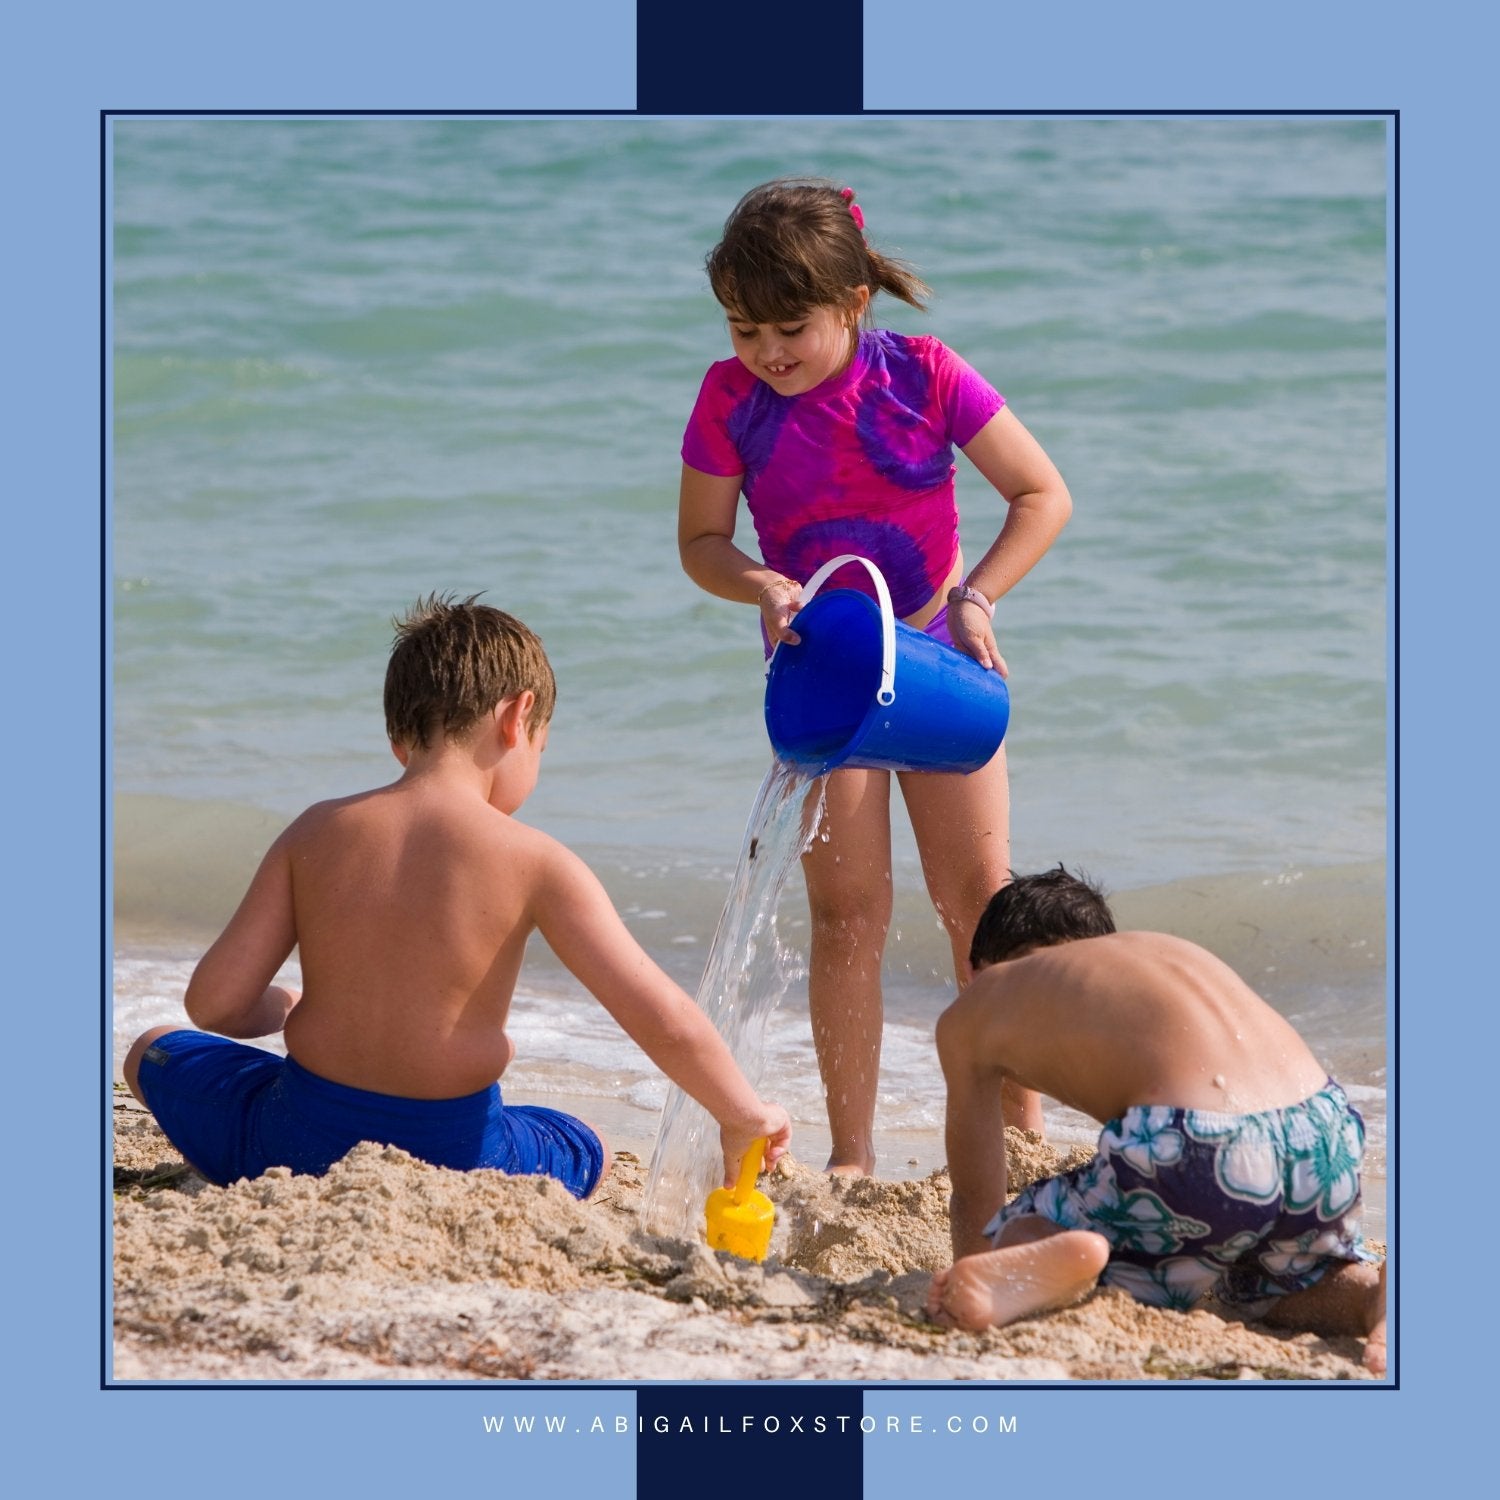 6 Activities To Do With Kids On Nantucket - Abigail Fox Designs